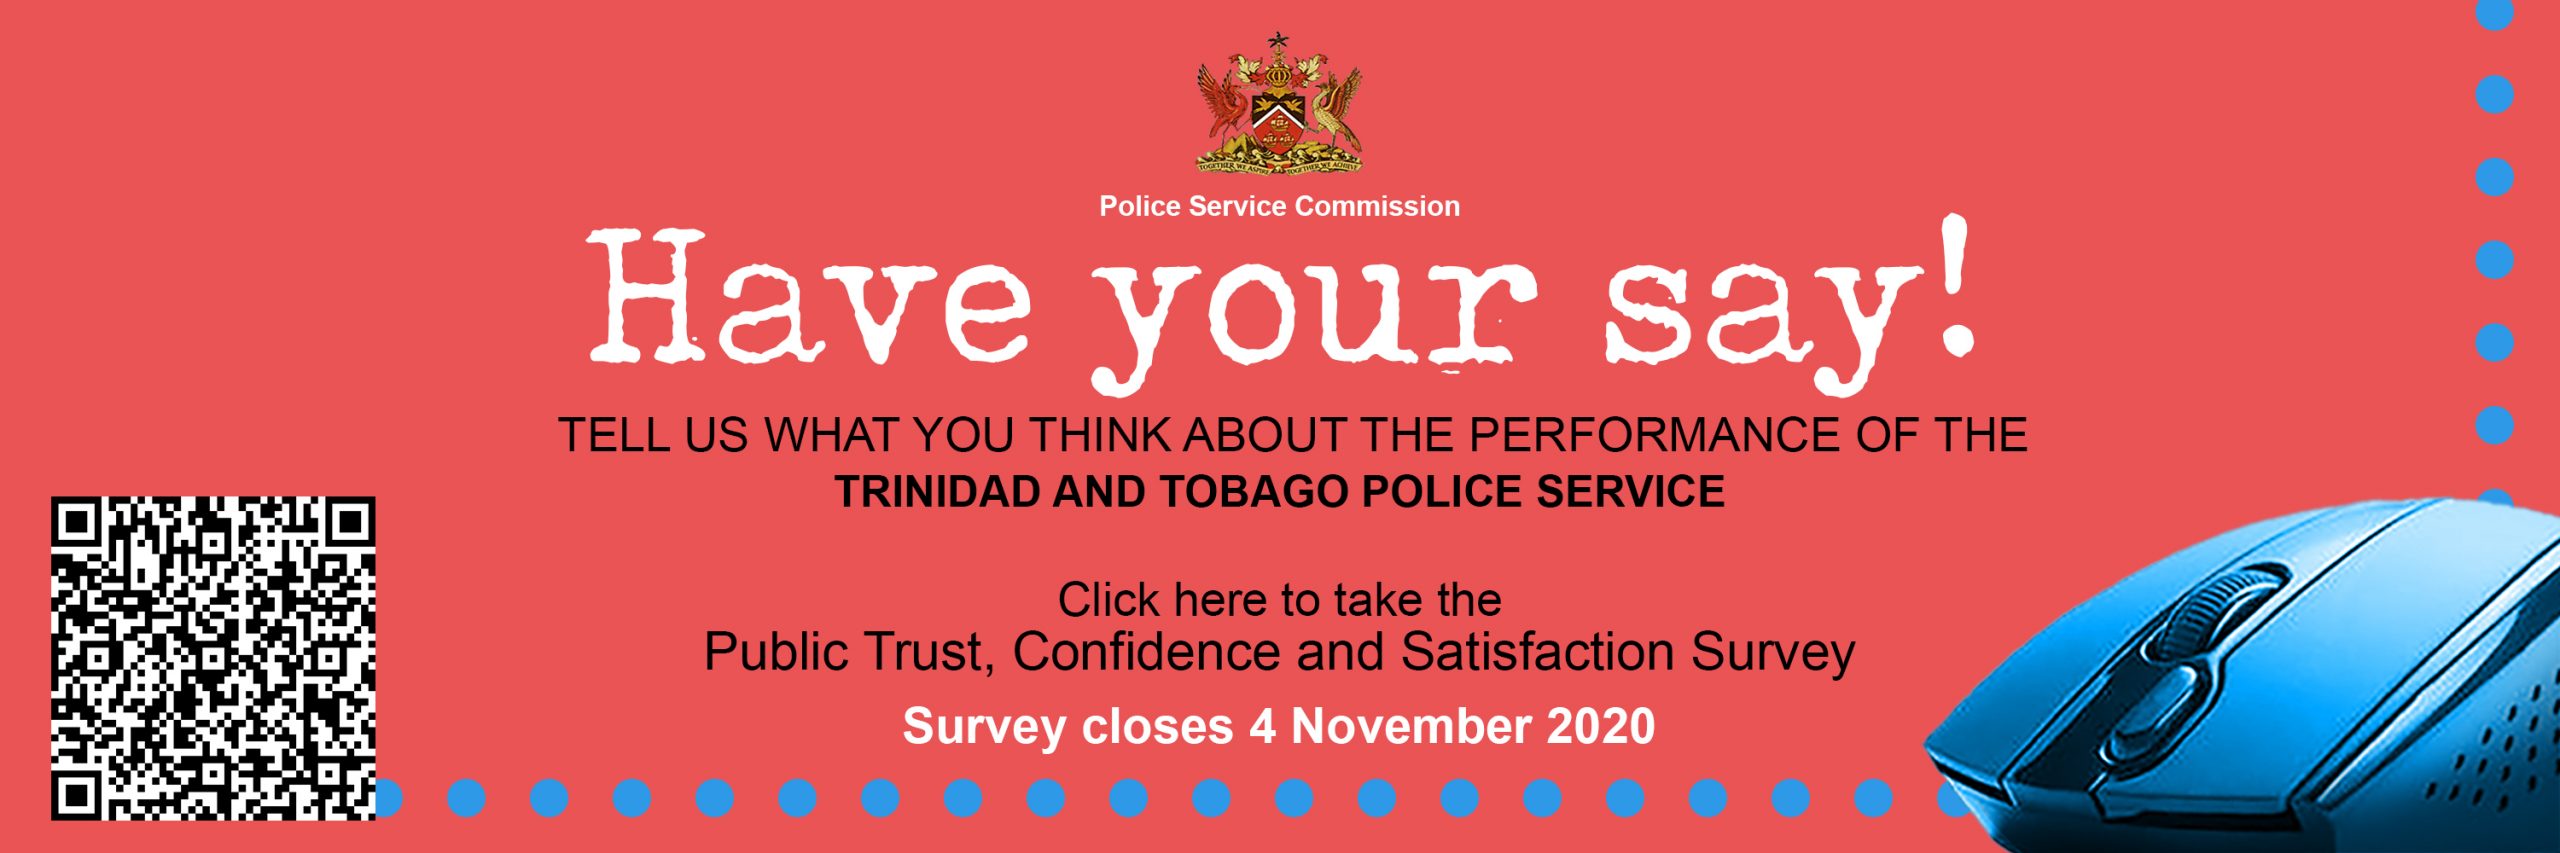 Do you have thoughts about the police service? Try this survey